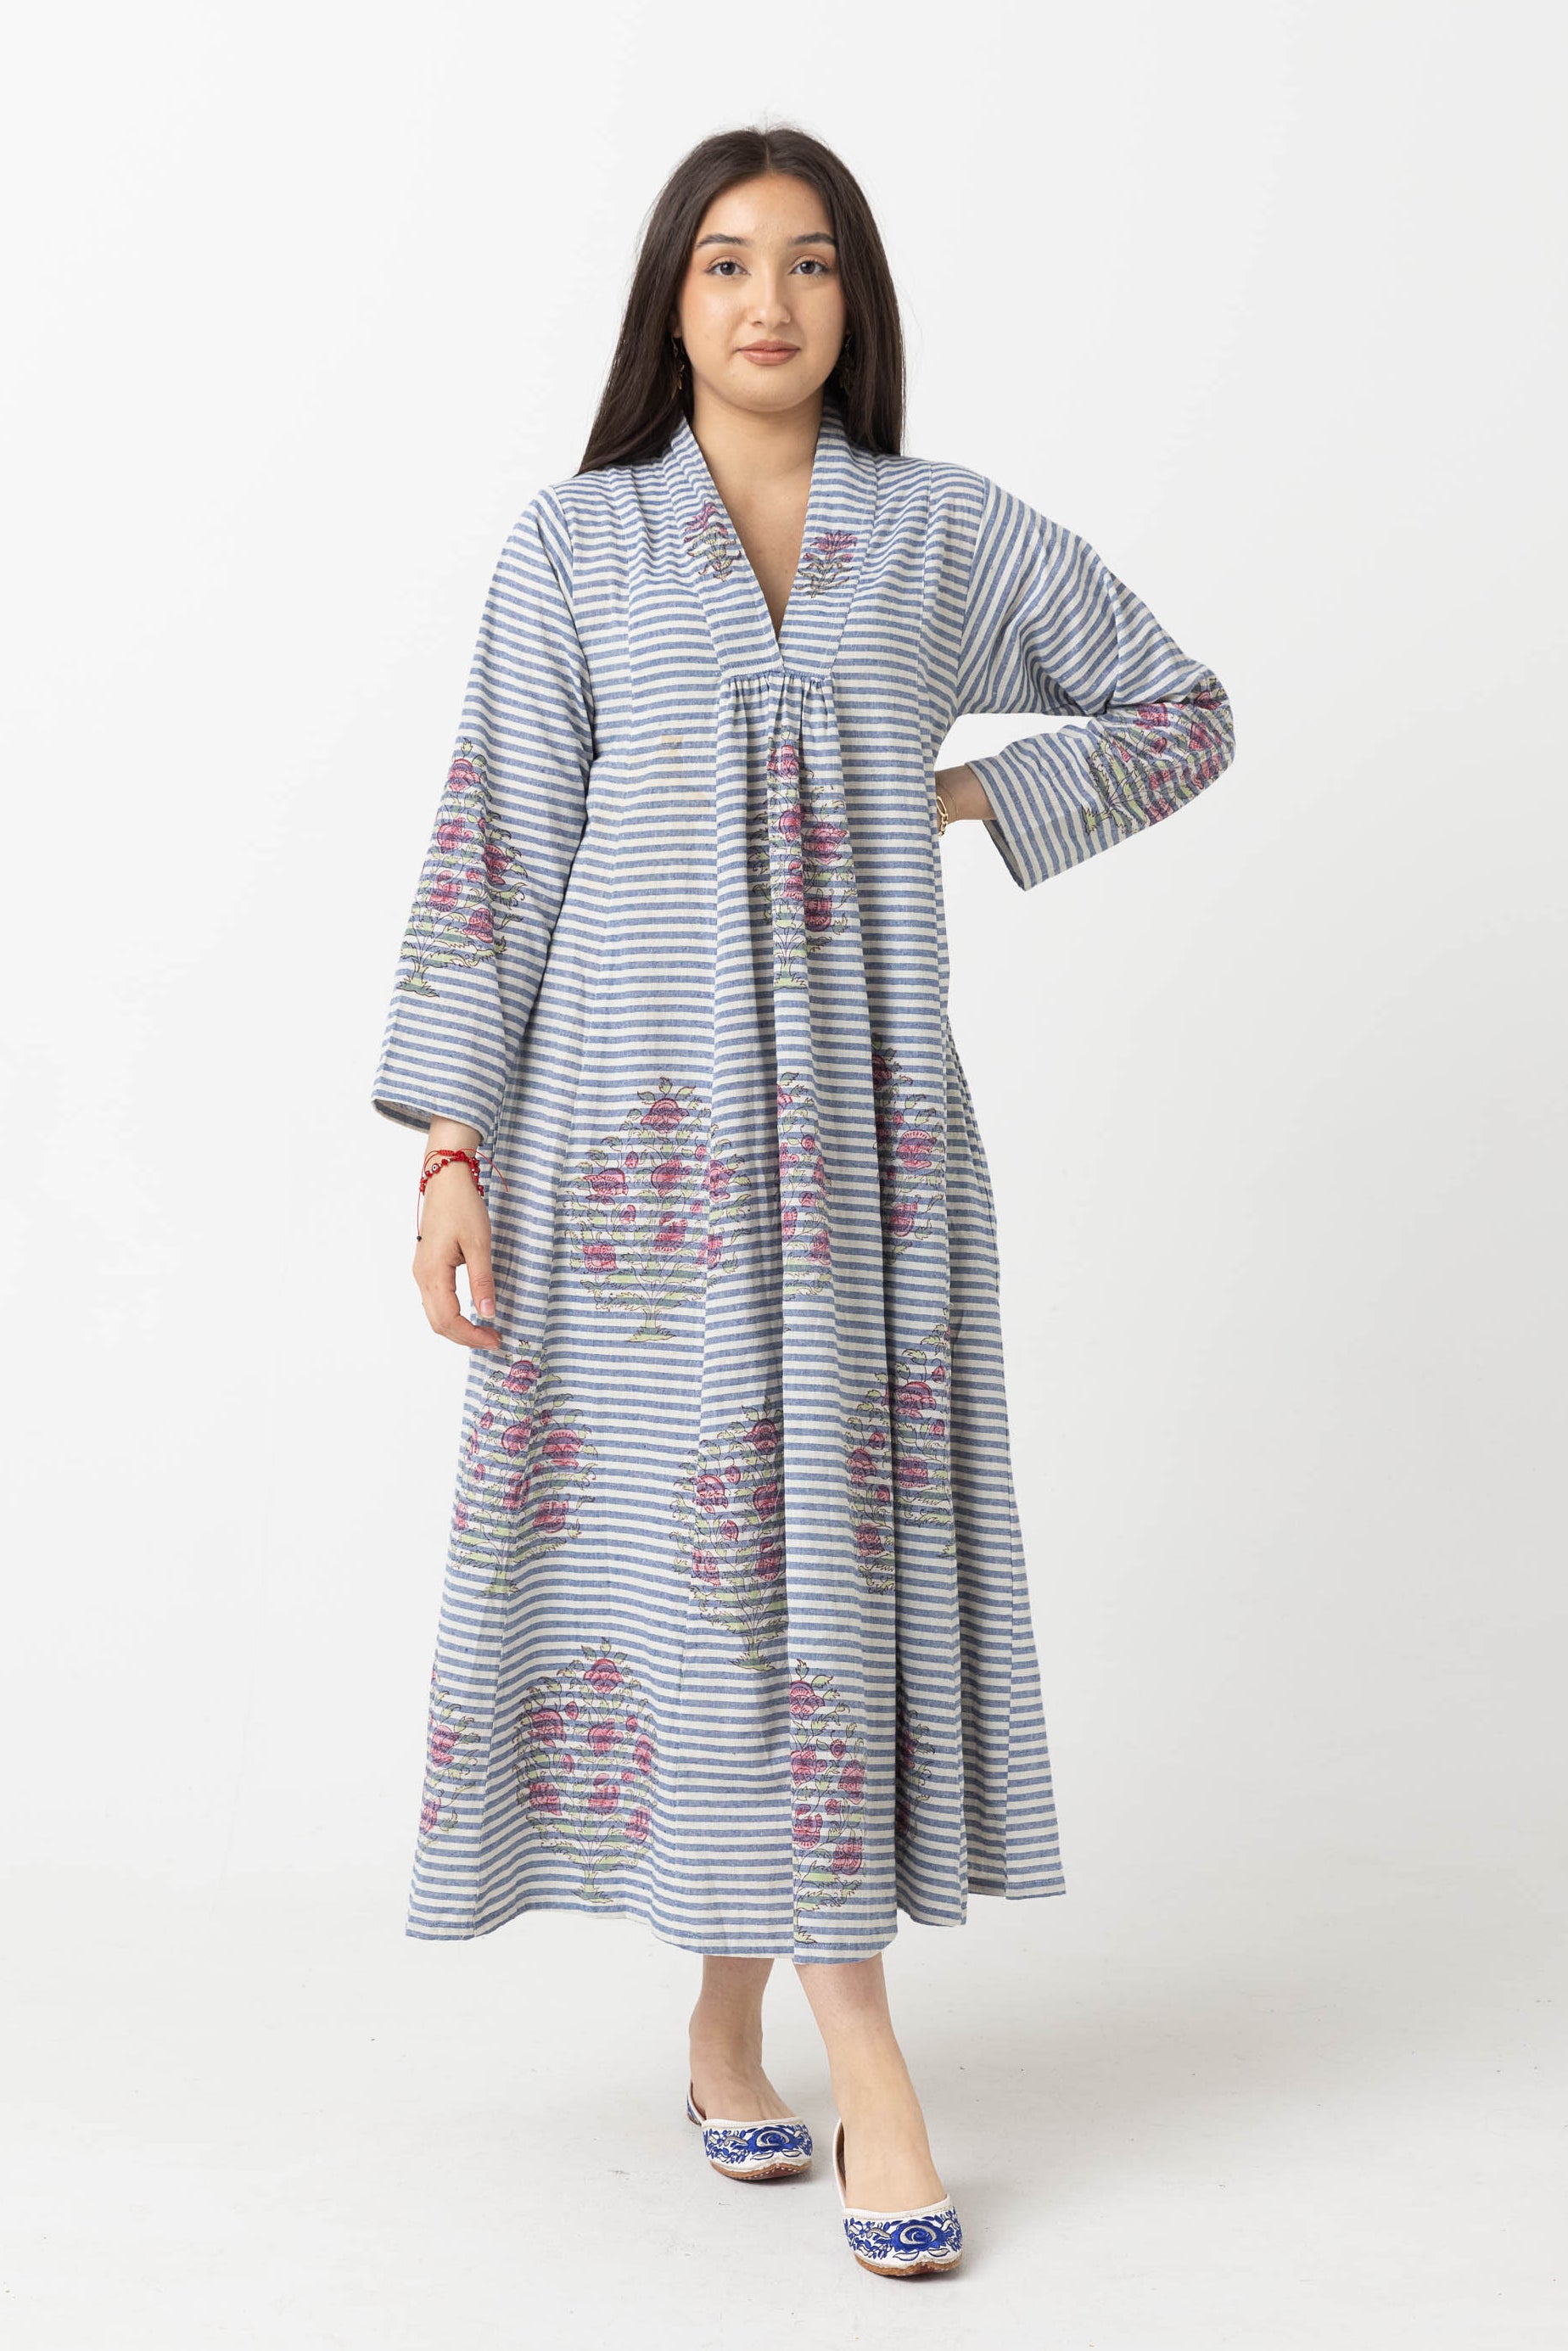 Handwoven Block Print Kaftan:  Blue & White Stripe with Pink Floral (S)